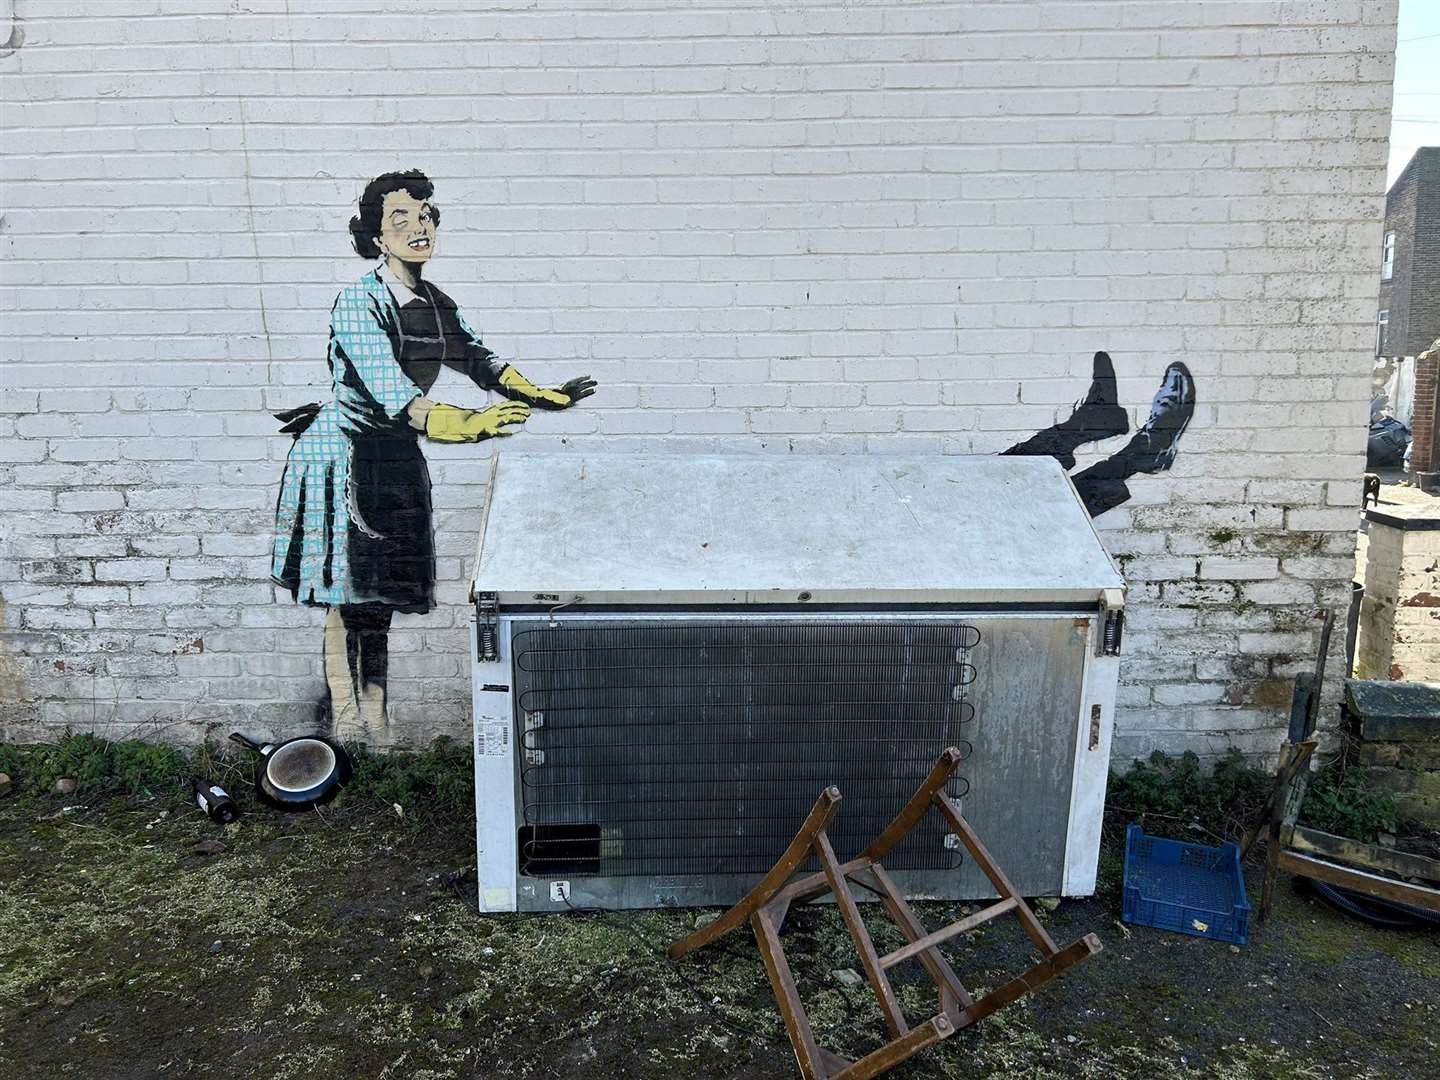 How the Banksy artwork in Margate looked before the removal of the chest freezer. Picture: Dan Bambridge-Higgins